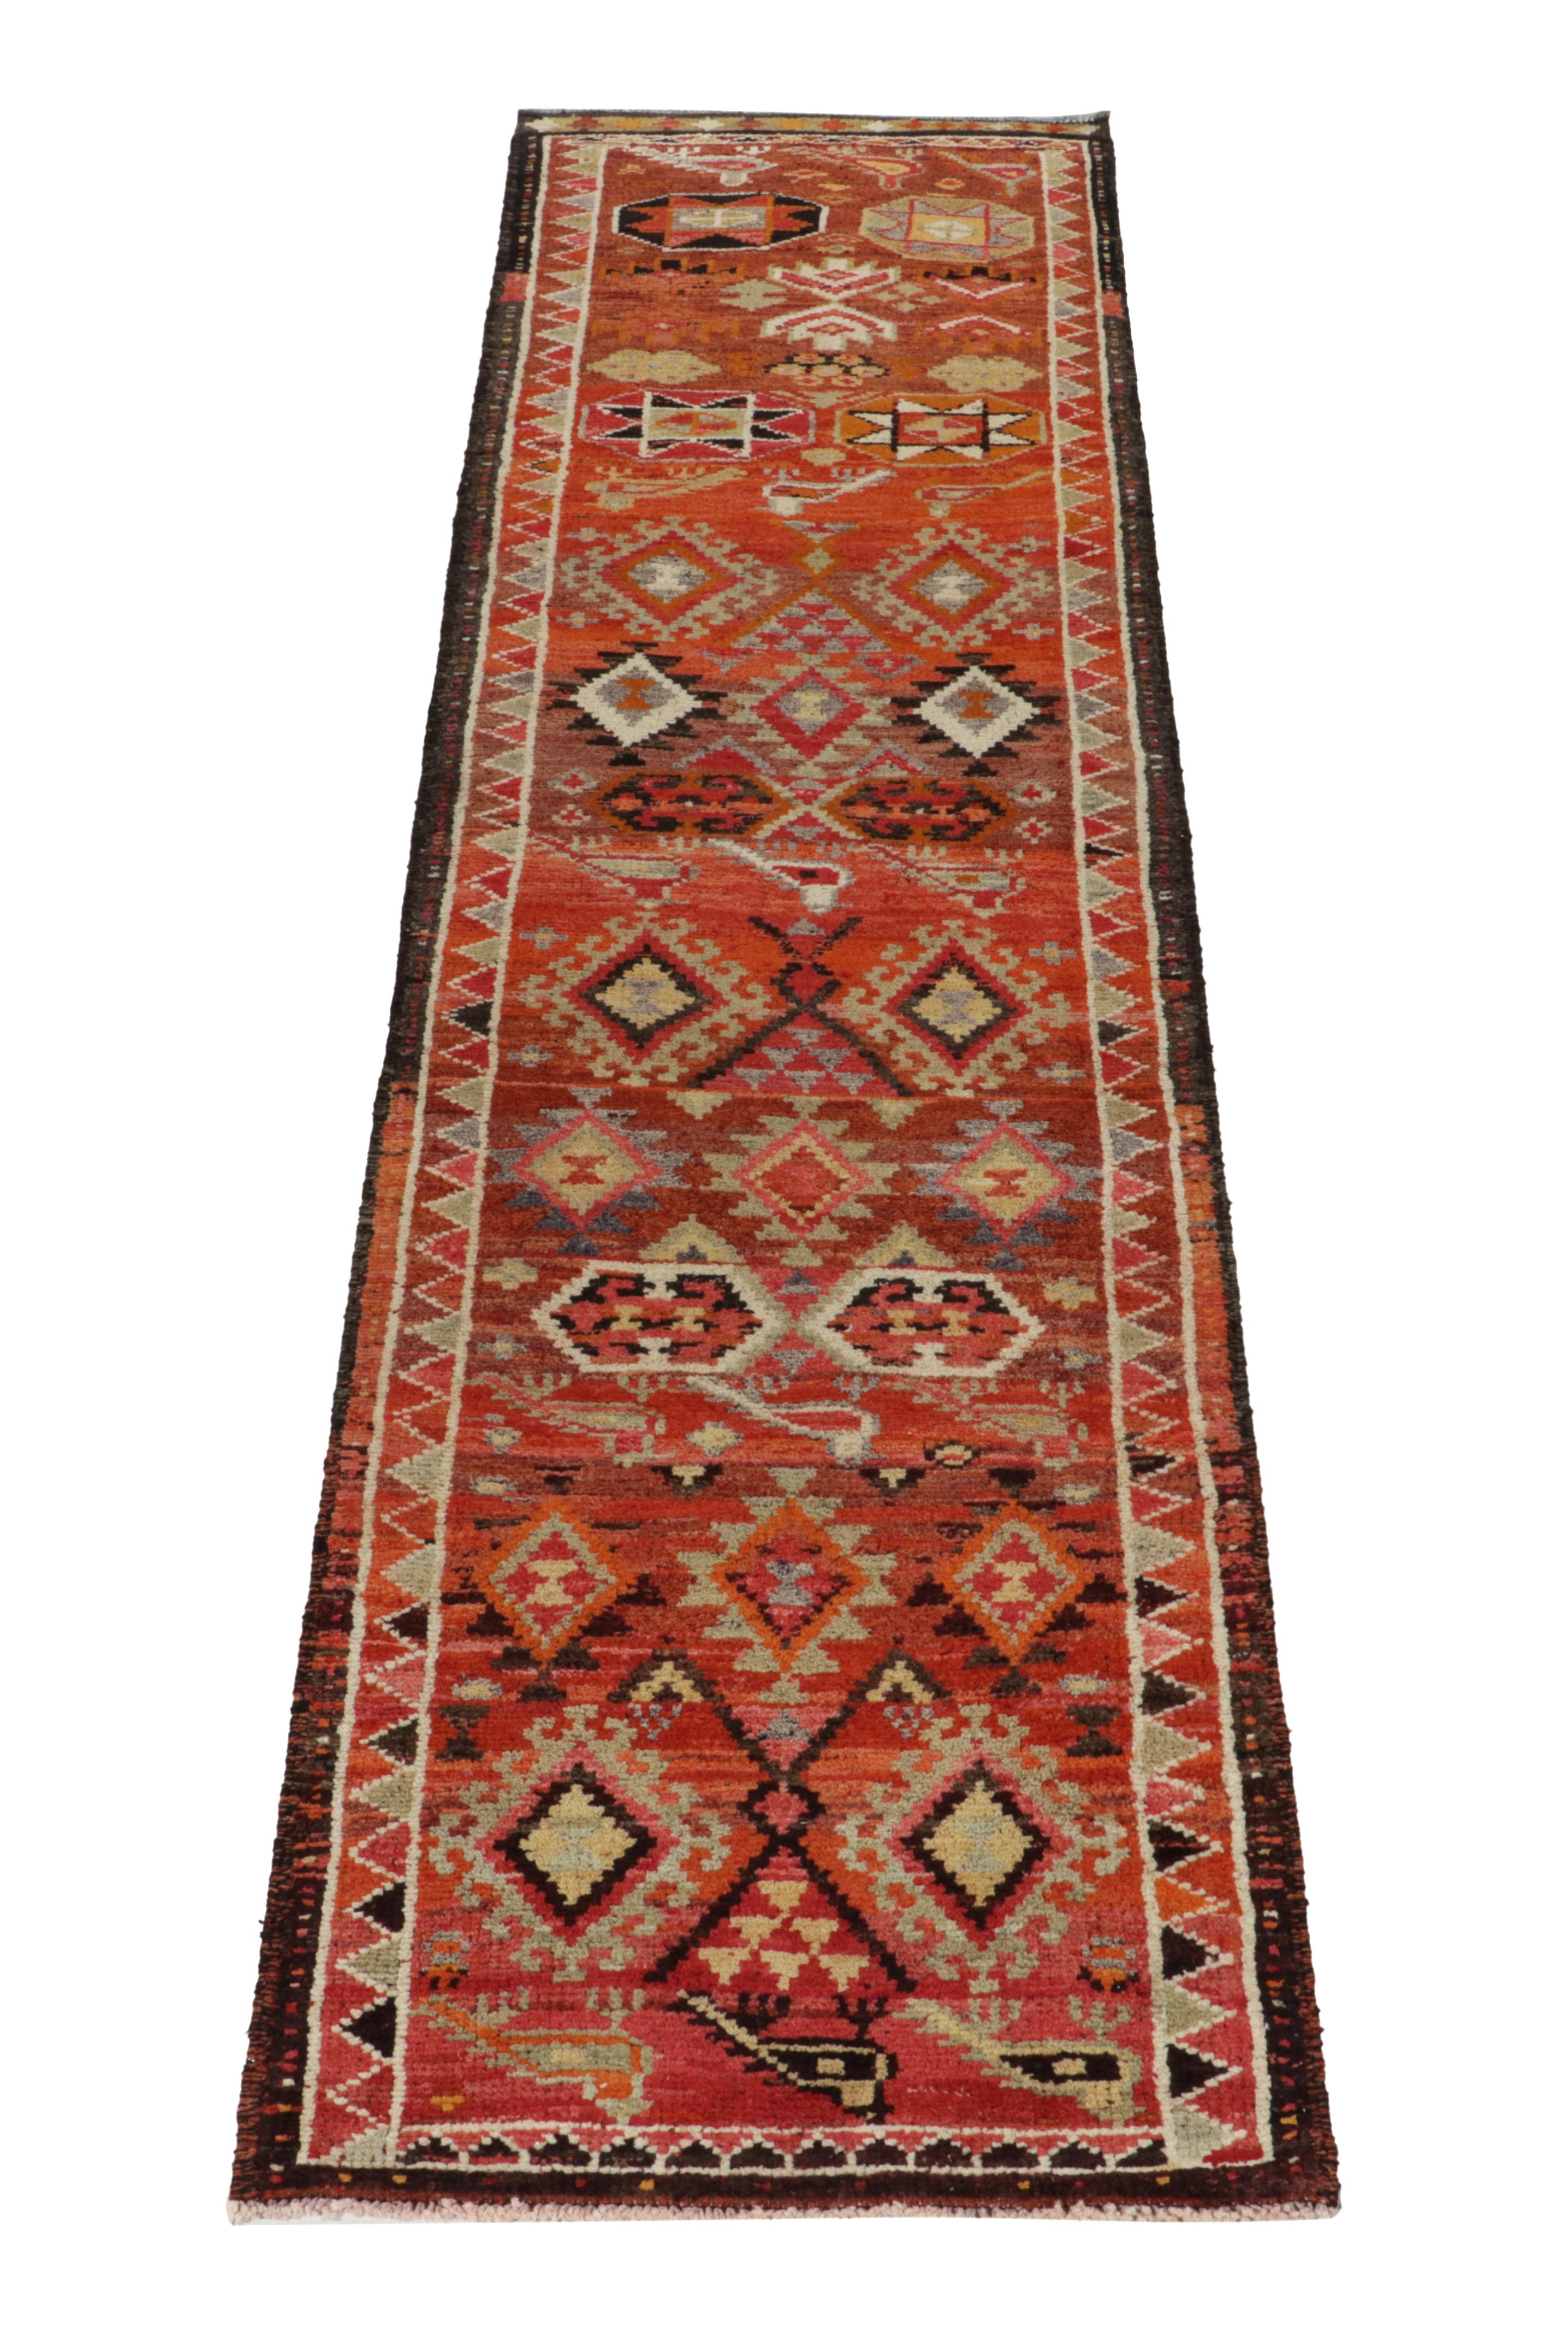 Hand-knotted in wool, a 3x11 runner from Rug & Kilim’s newly unvailed curation of rare tribal pieces. 

Originating from Turkey circa 1950-1960, the rug enjoys hexagons & traditional motifs on the field in warm tones of orange, red, pink, brown,